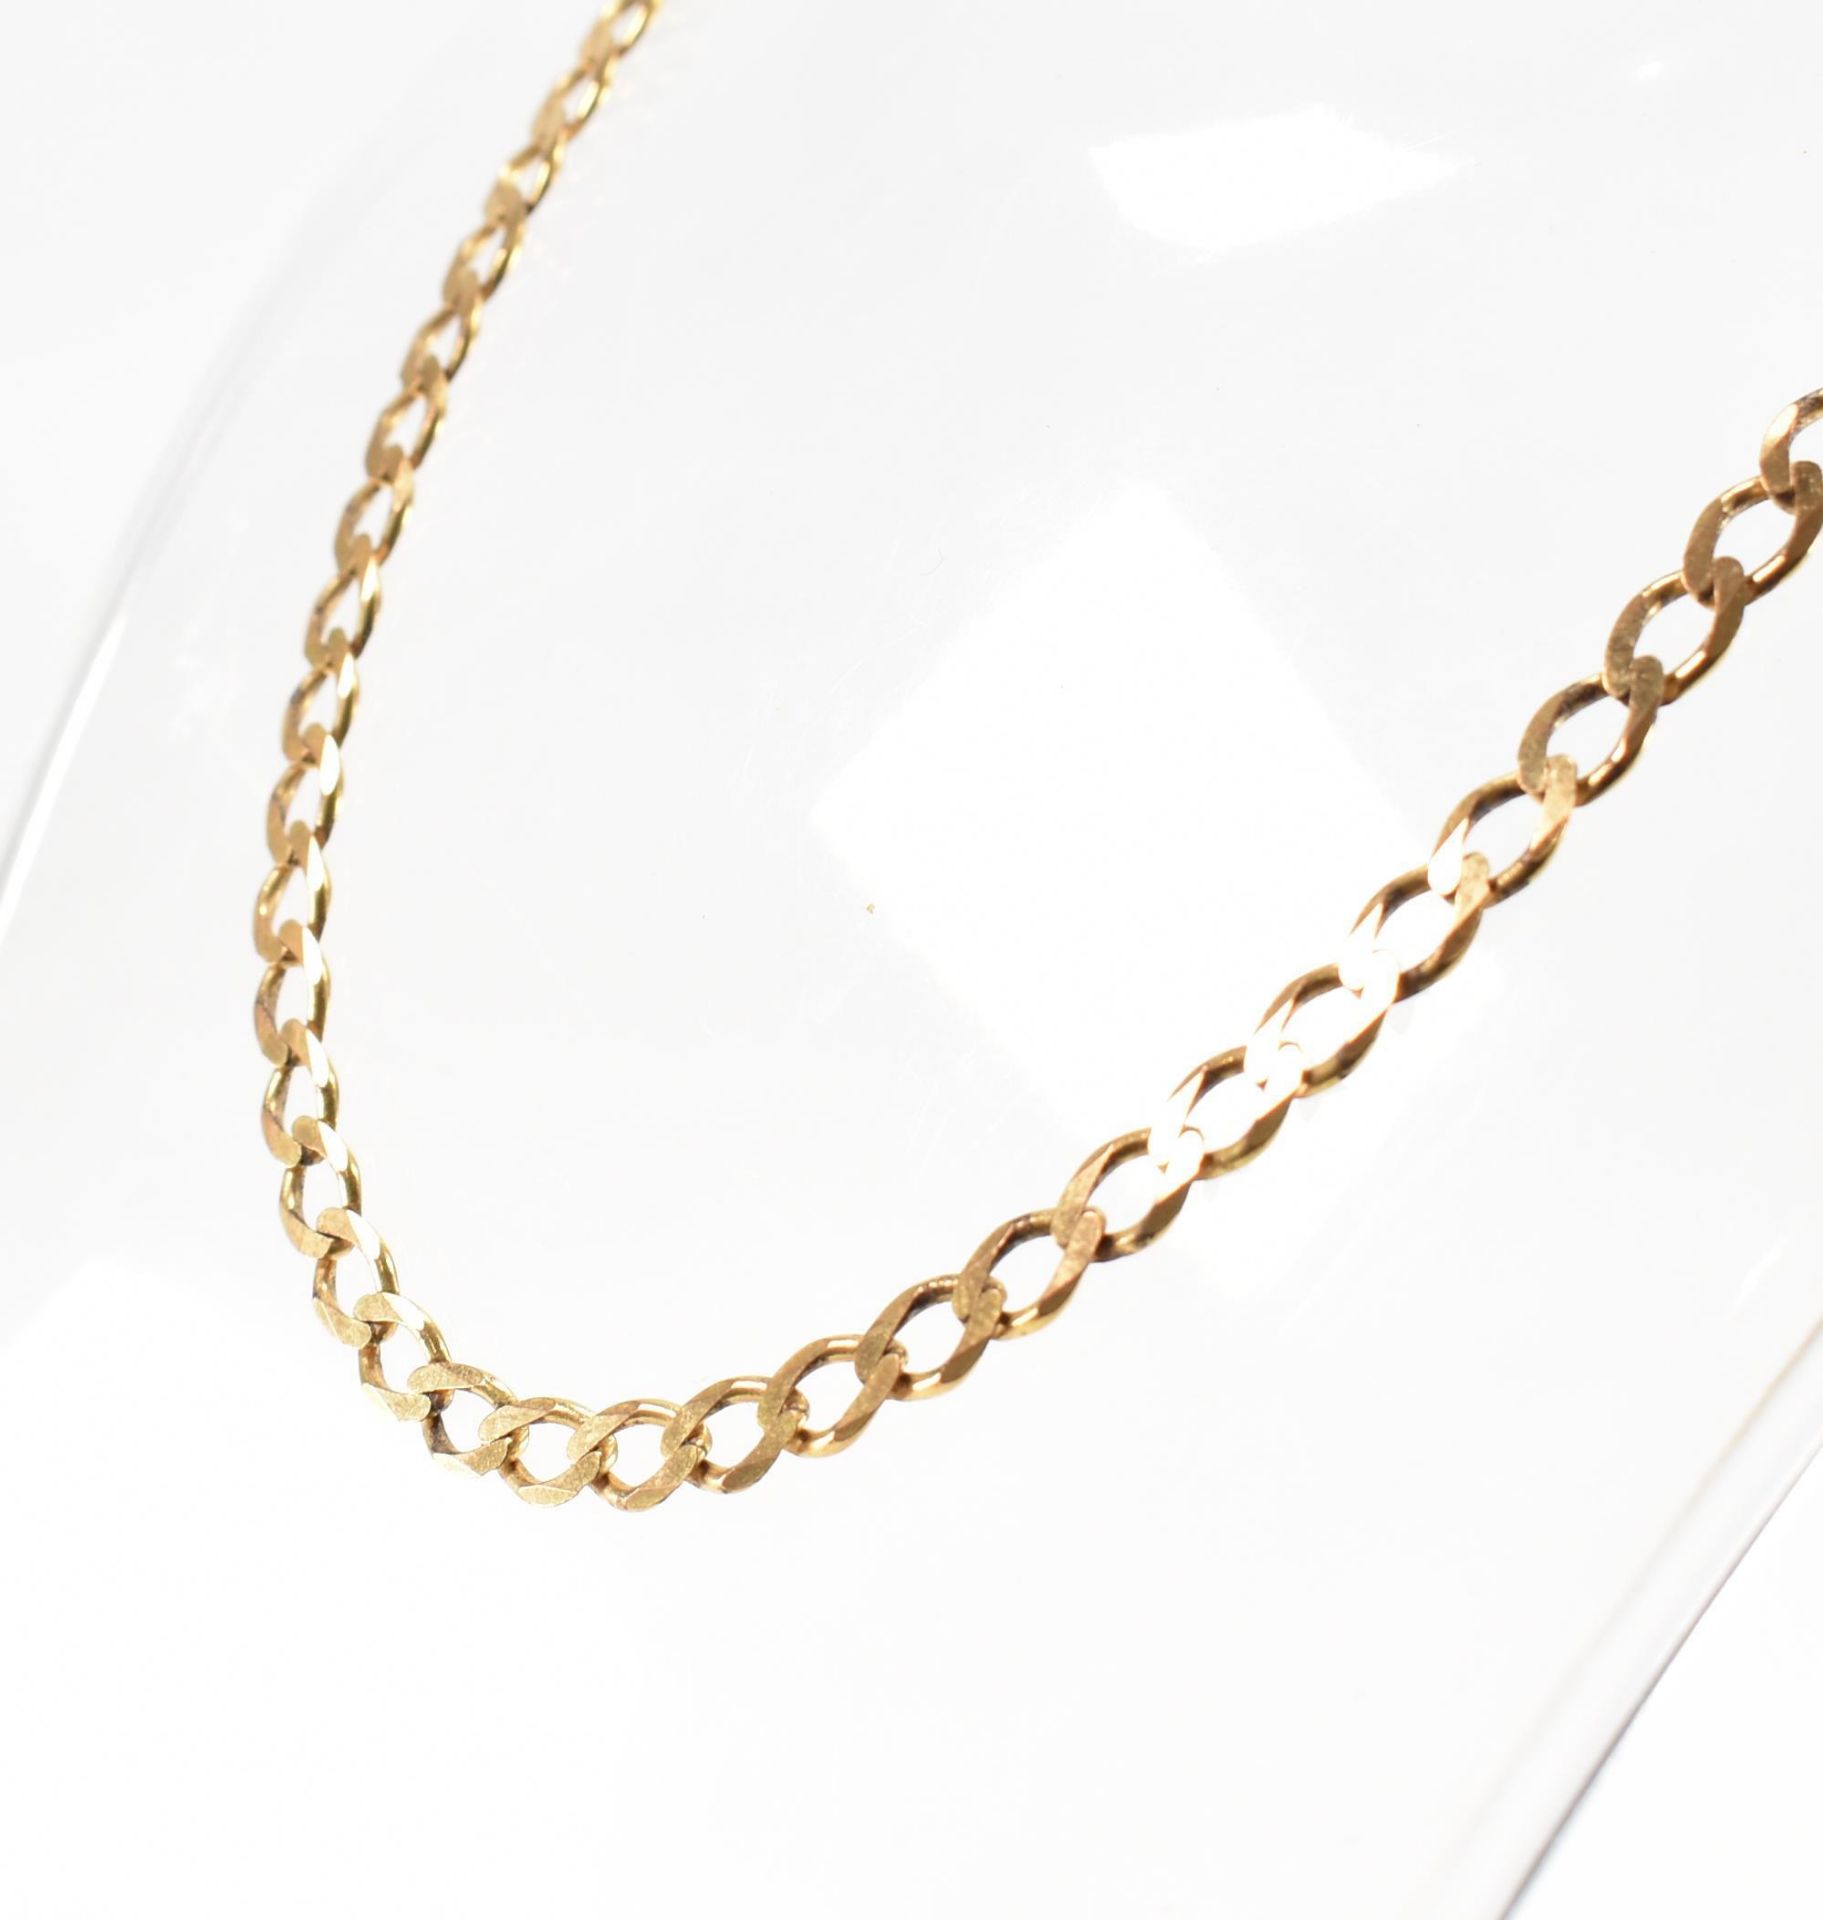 GOLD FLAT LINK NECKLACE CHAIN - Image 2 of 4